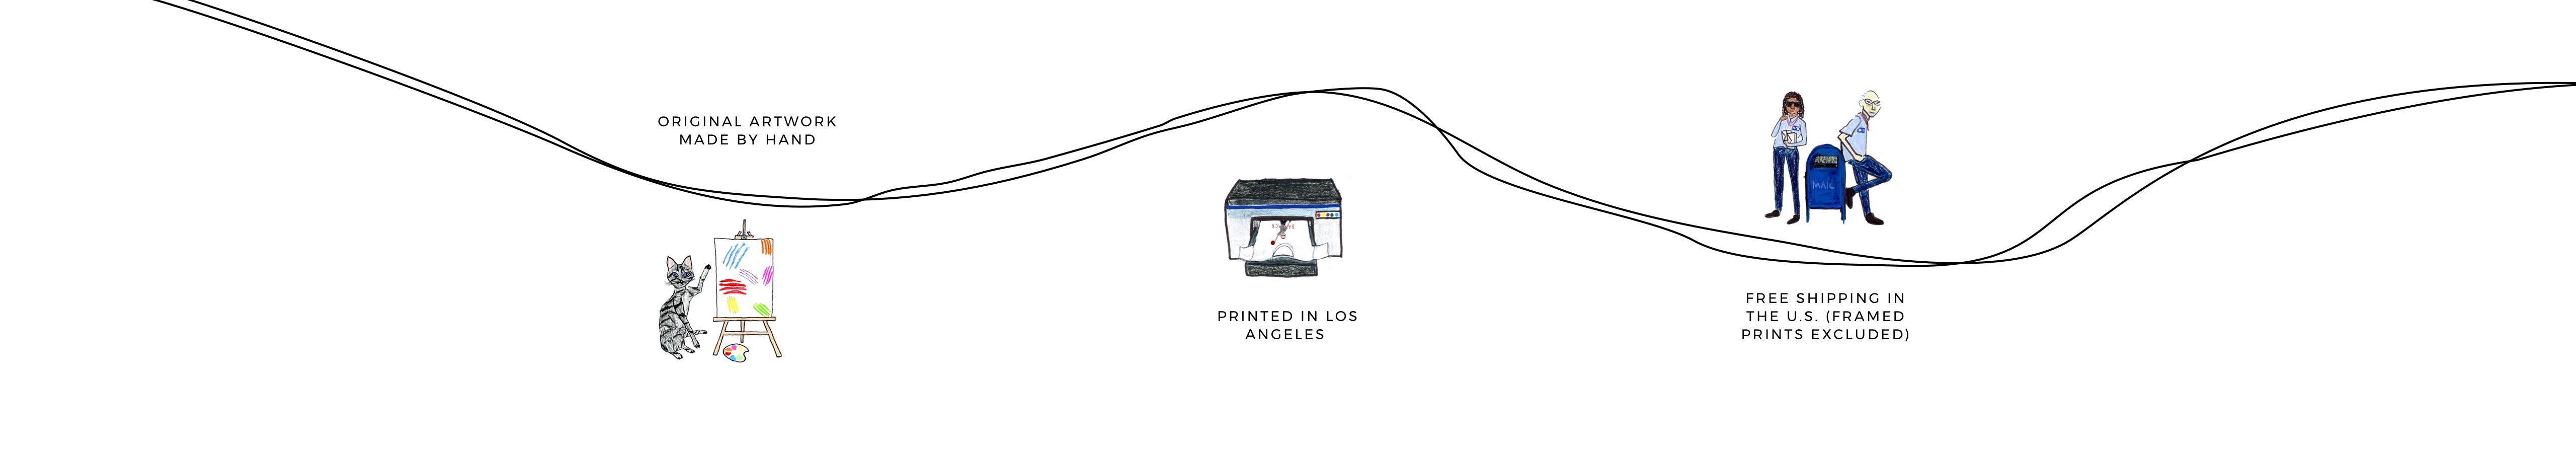 Original artwork made by hand, printed in LA, with free shipping in the US